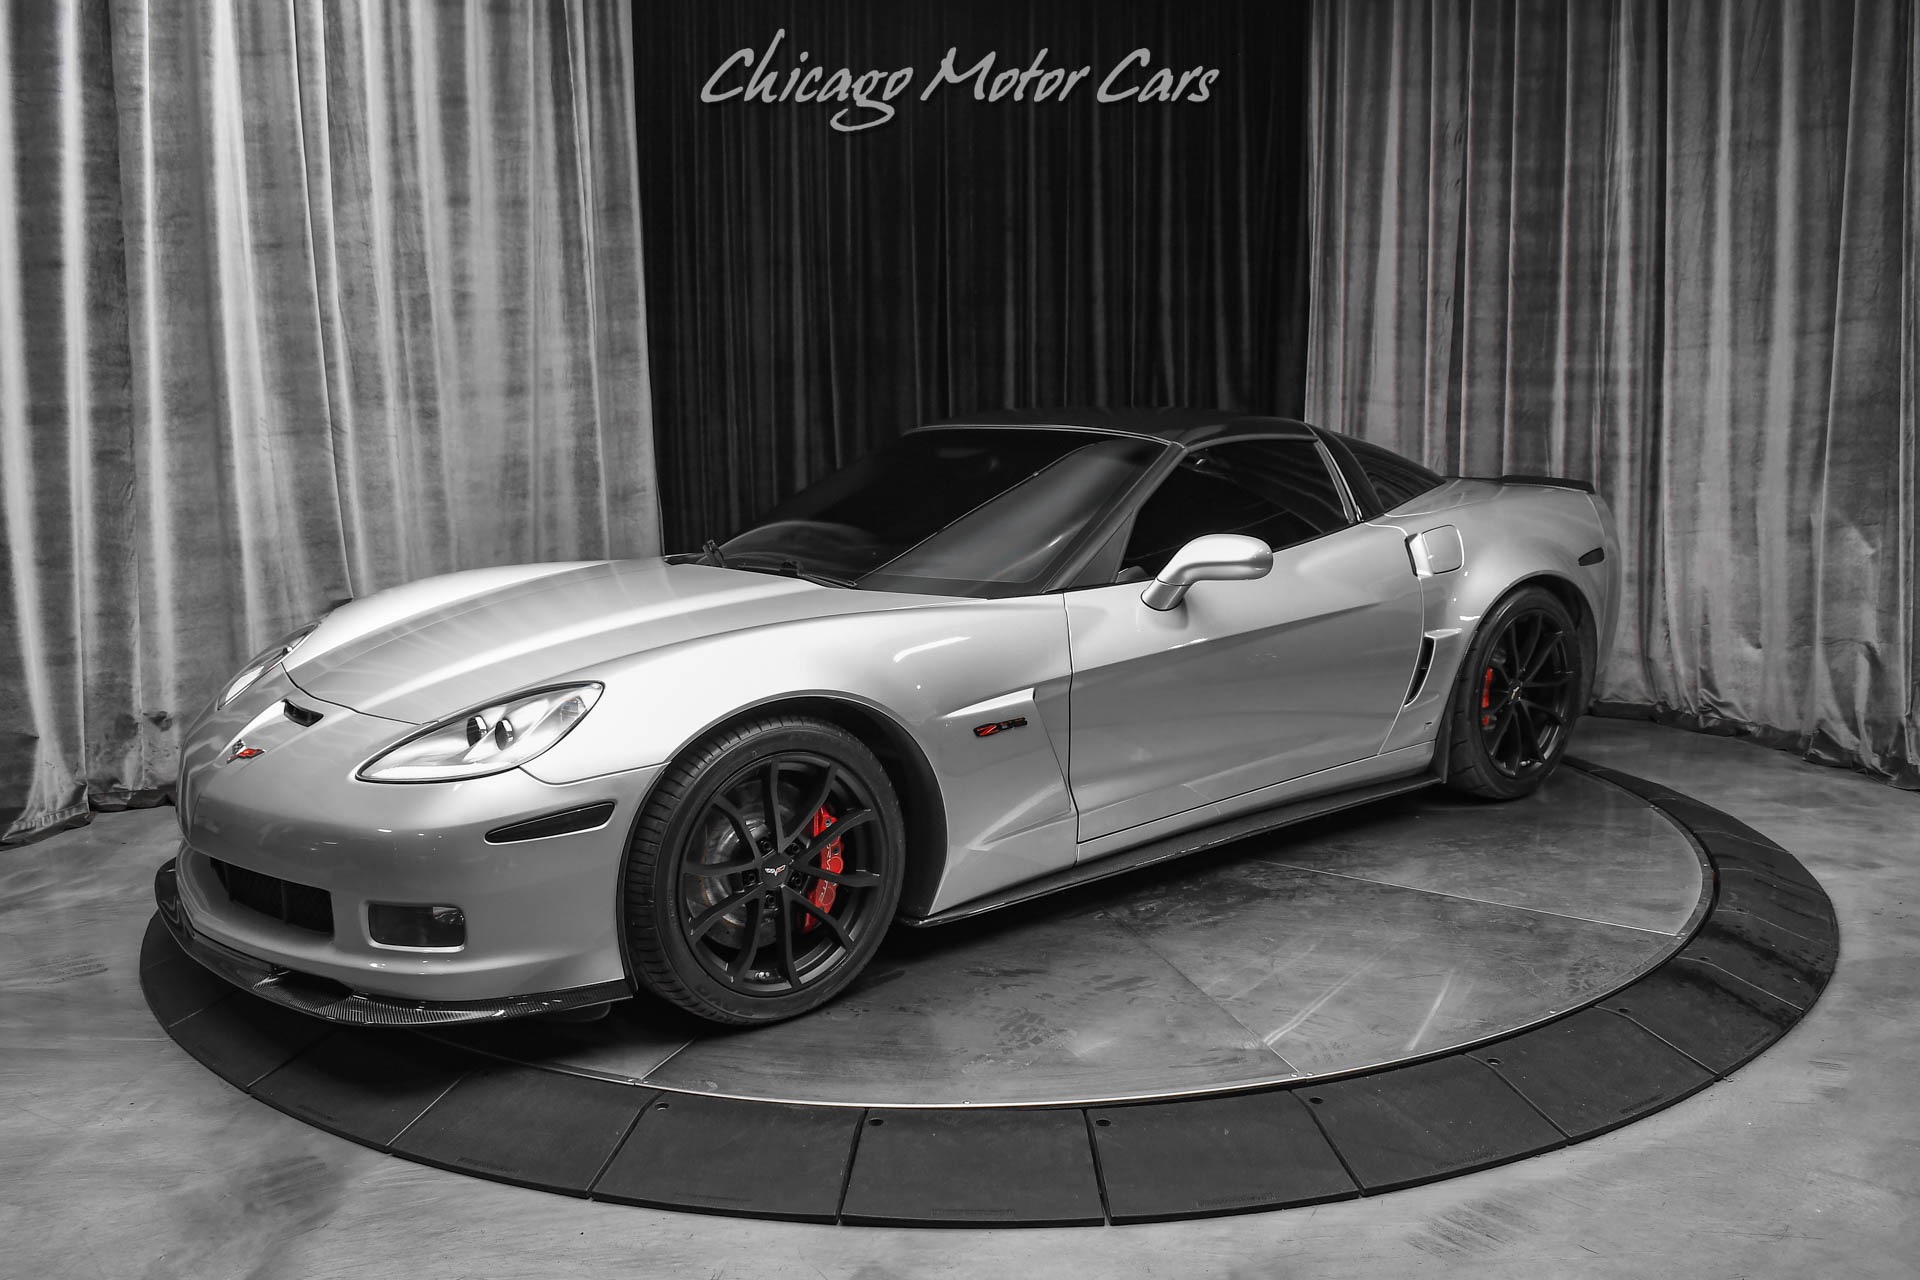 Used-2006-Chevrolet-Corvette-Z06-2LZ-Coupe-643-RWHP-on-E85-All-Motor-Low-Miles